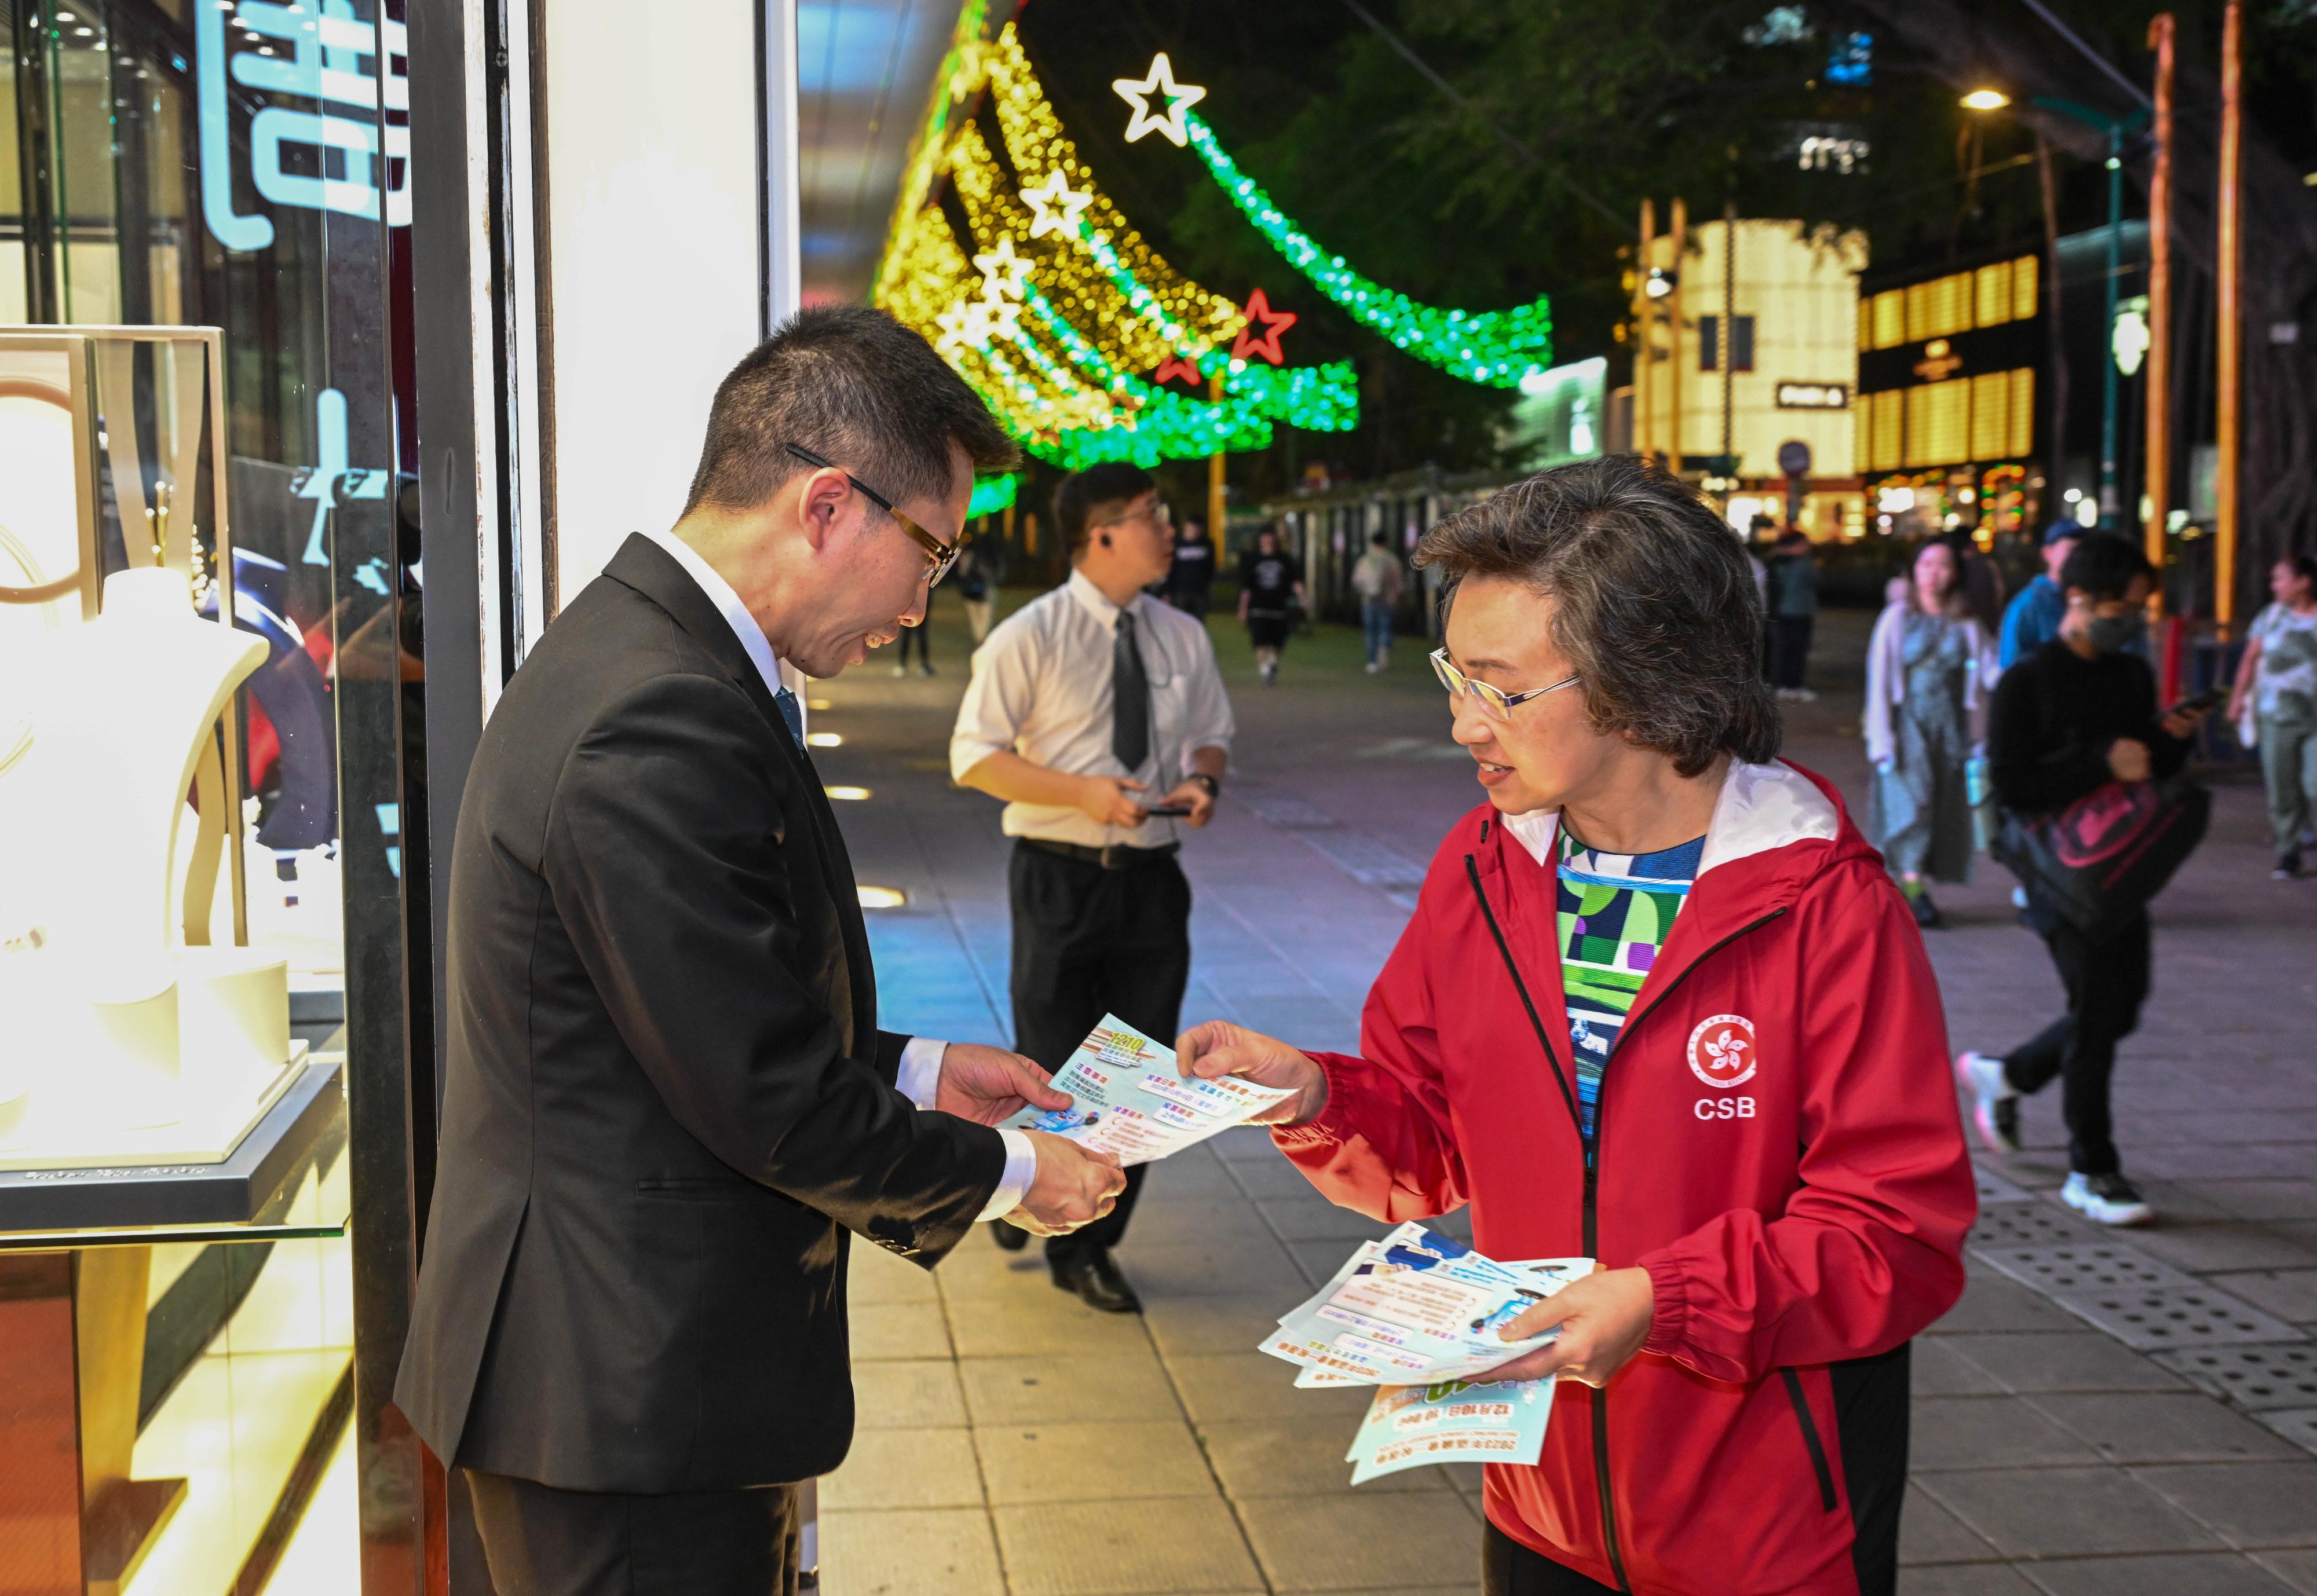 After encouraging civil servants to vote in the District Council (DC) election, the Civil Service Bureau Volunteer Team went to busy Tsim Sha Tsui this evening (November 27) and distributed promotional leaflets about the DC election to shopkeepers and members of the public to call on them to vote on December 10 to elect DC members who will serve the community. Photo shows the Secretary for the Civil Service, Mrs Ingrid Yeung (right), handing out a promotional leaflet to a staff member of a retail shop and introduced to him the points to note in casting his vote in the DC election.